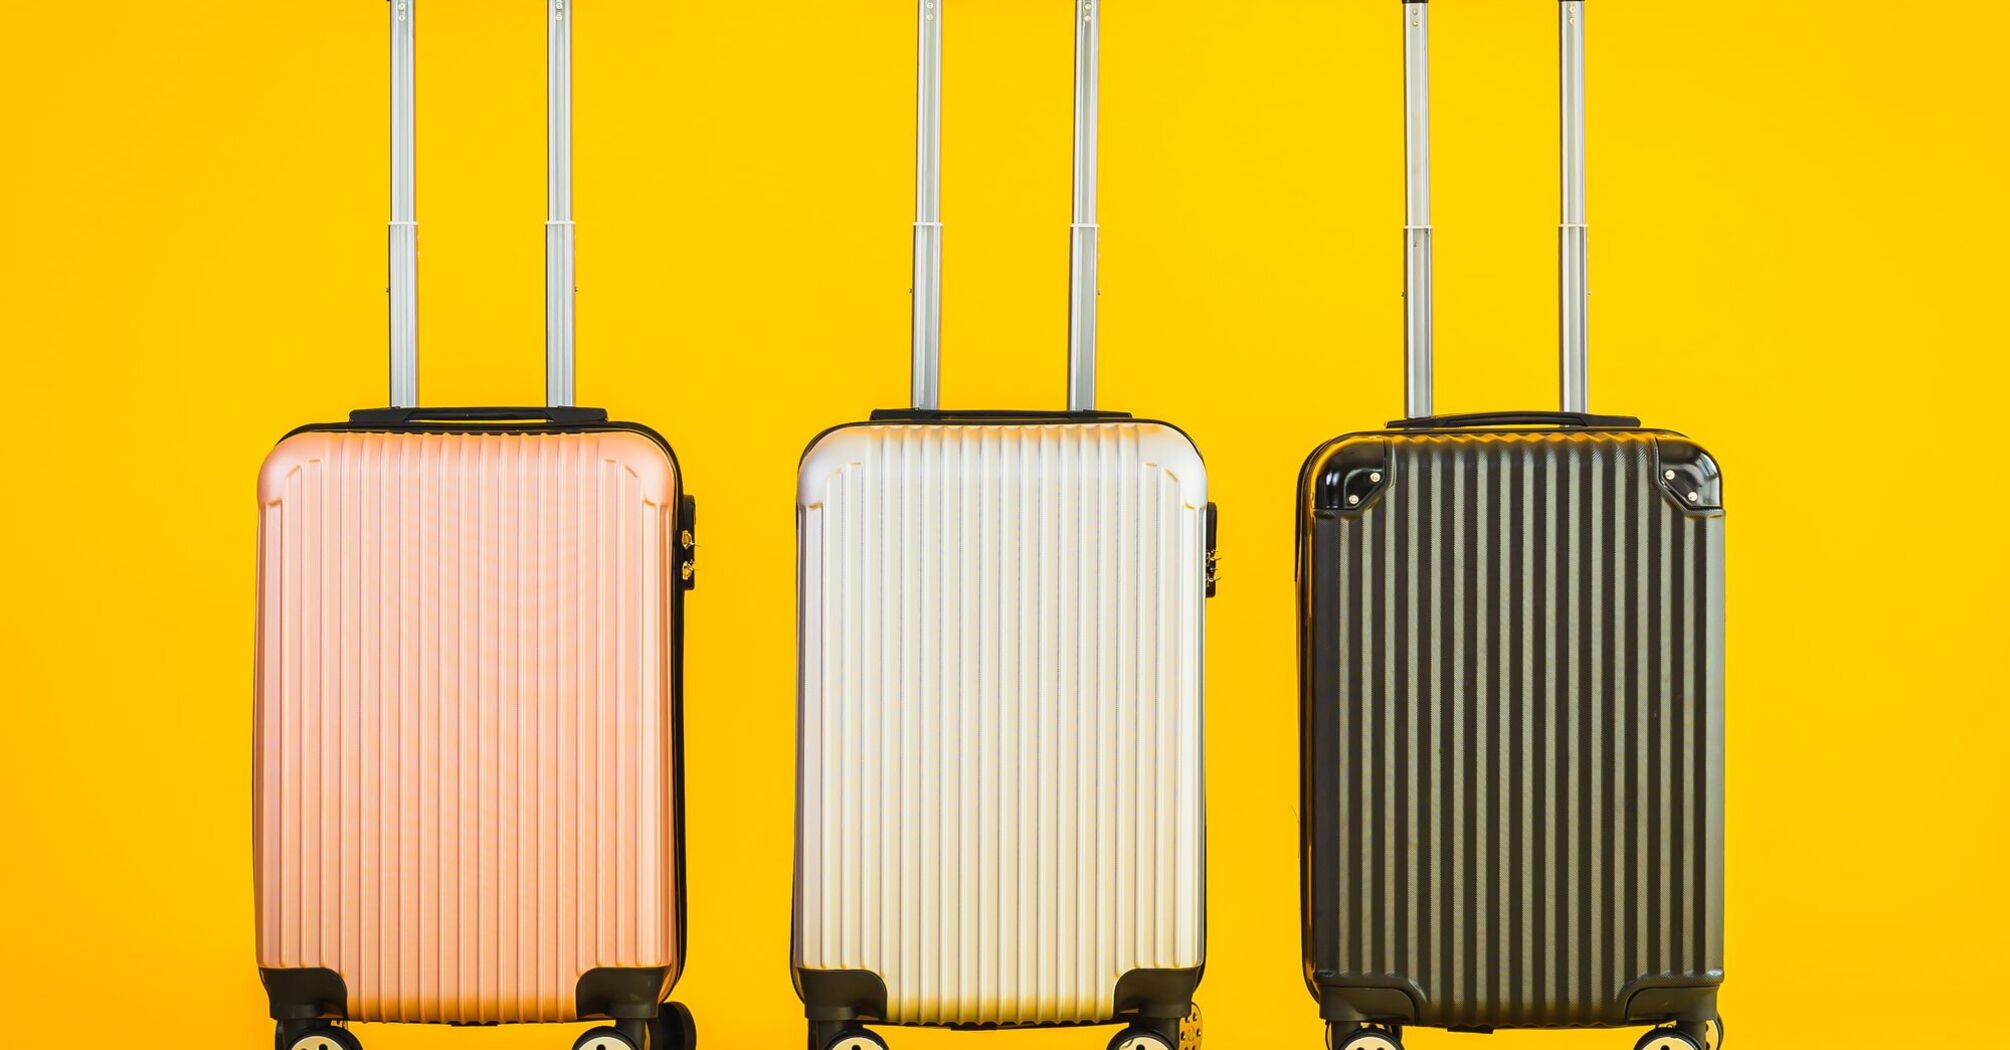 Do not put it in your suitcase: what items cannot be transported in the luggage when flying with TUI and Ryanair airlines